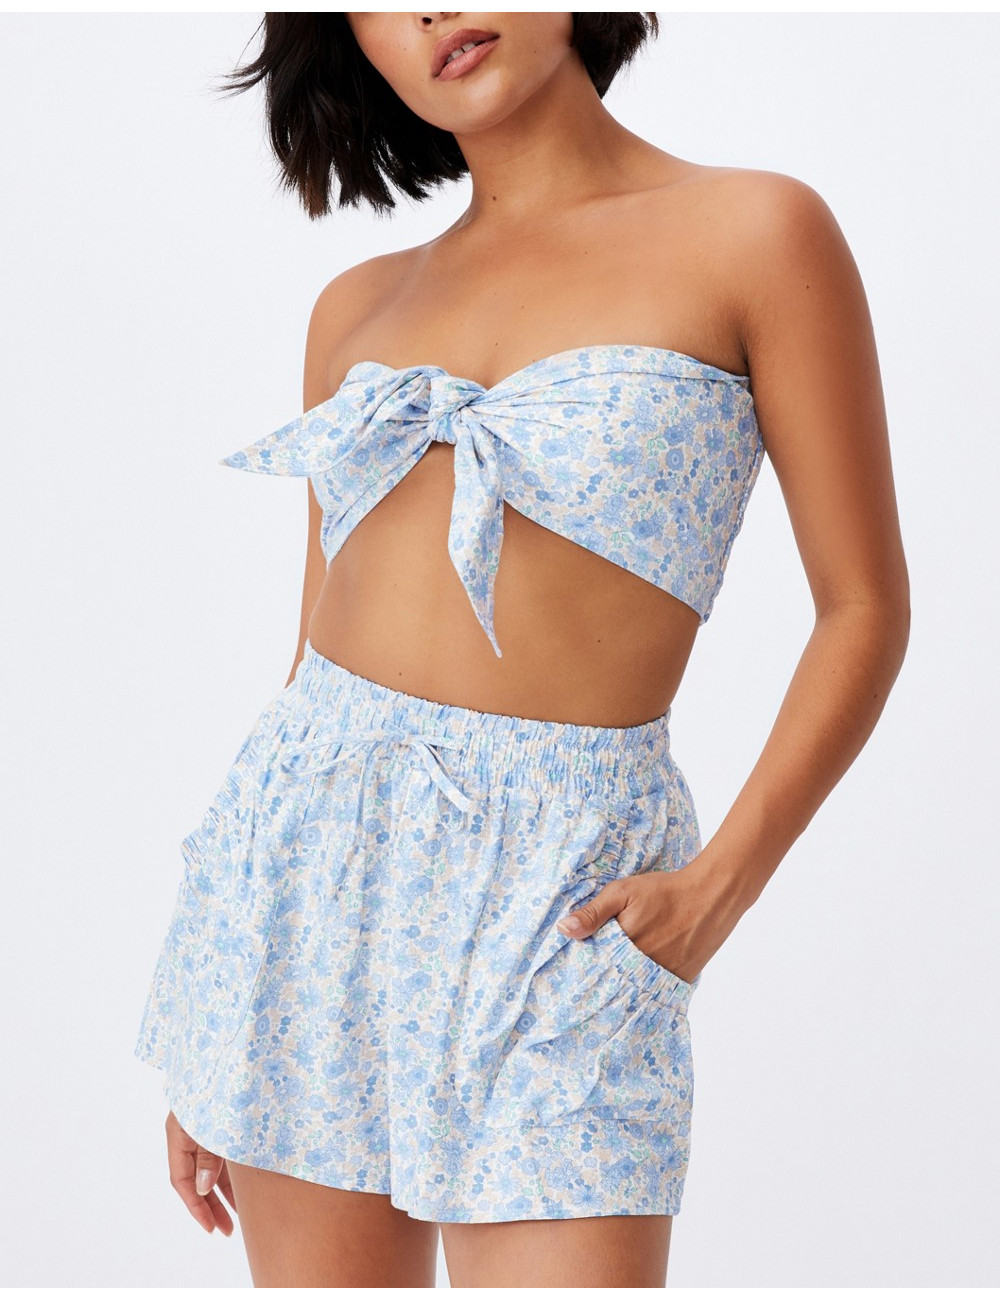 Cotton:On co-ord tie front...